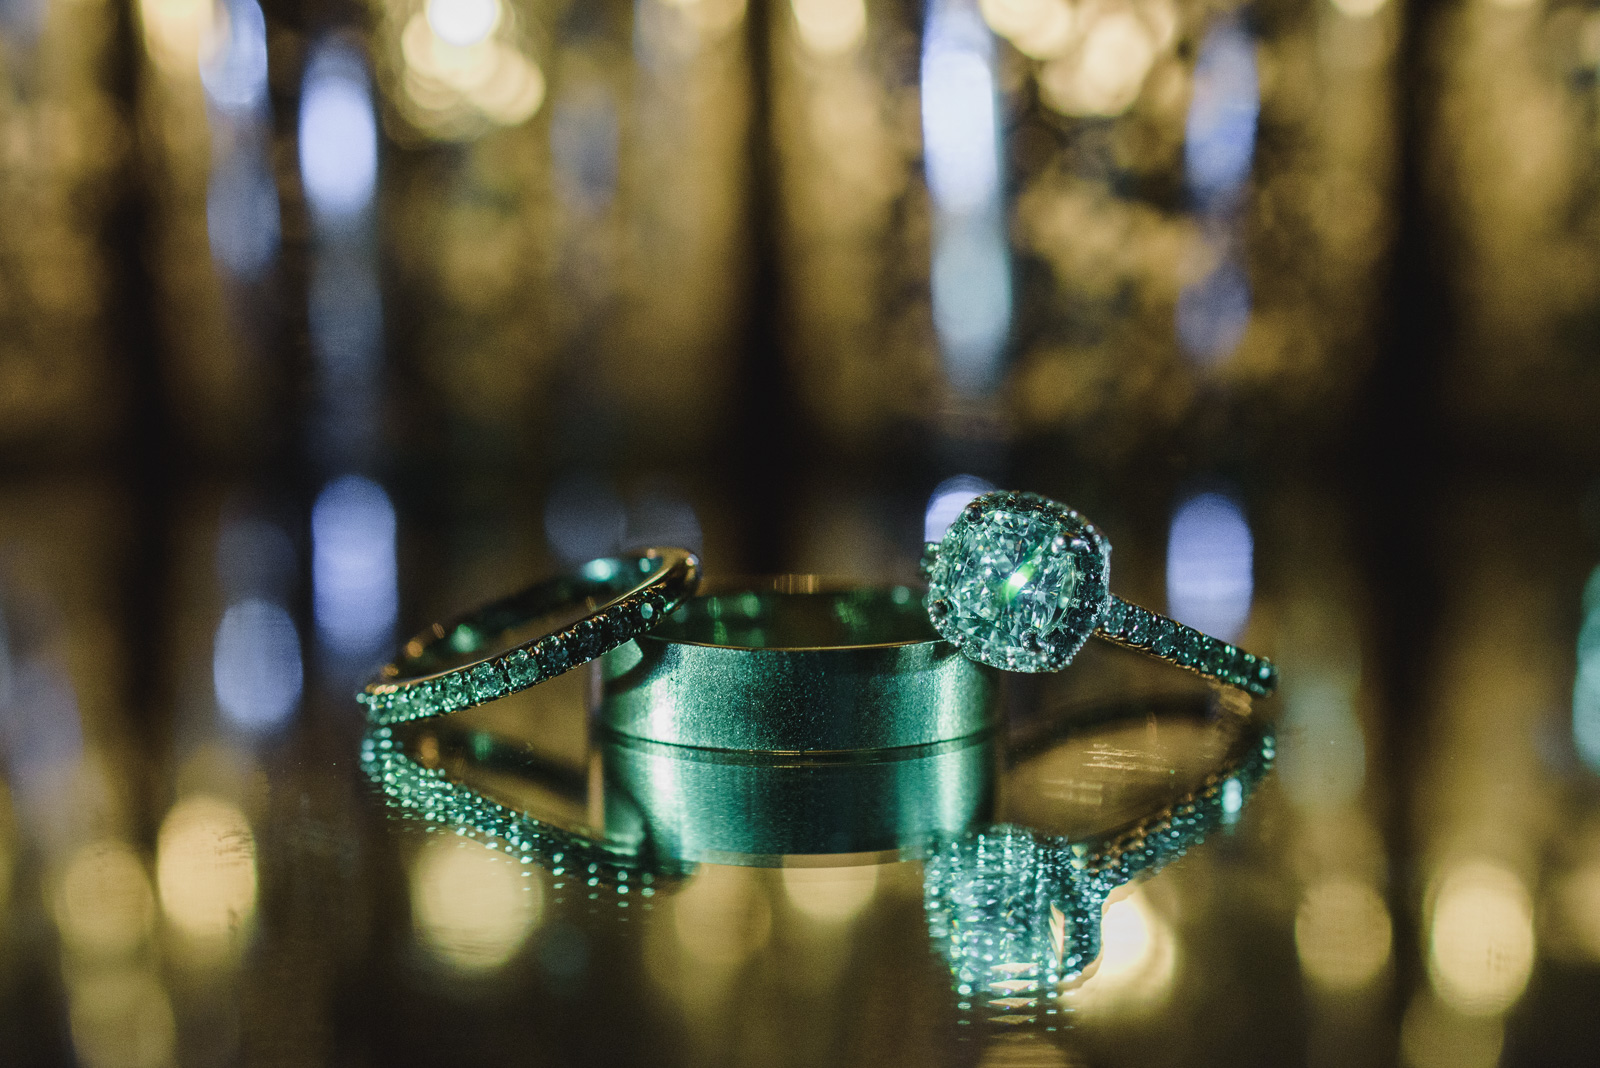 creative lighting picture of wedding rings at the Pear Tree Restaurant in Burnaby BC - Vancouver Island Wedding Photographer